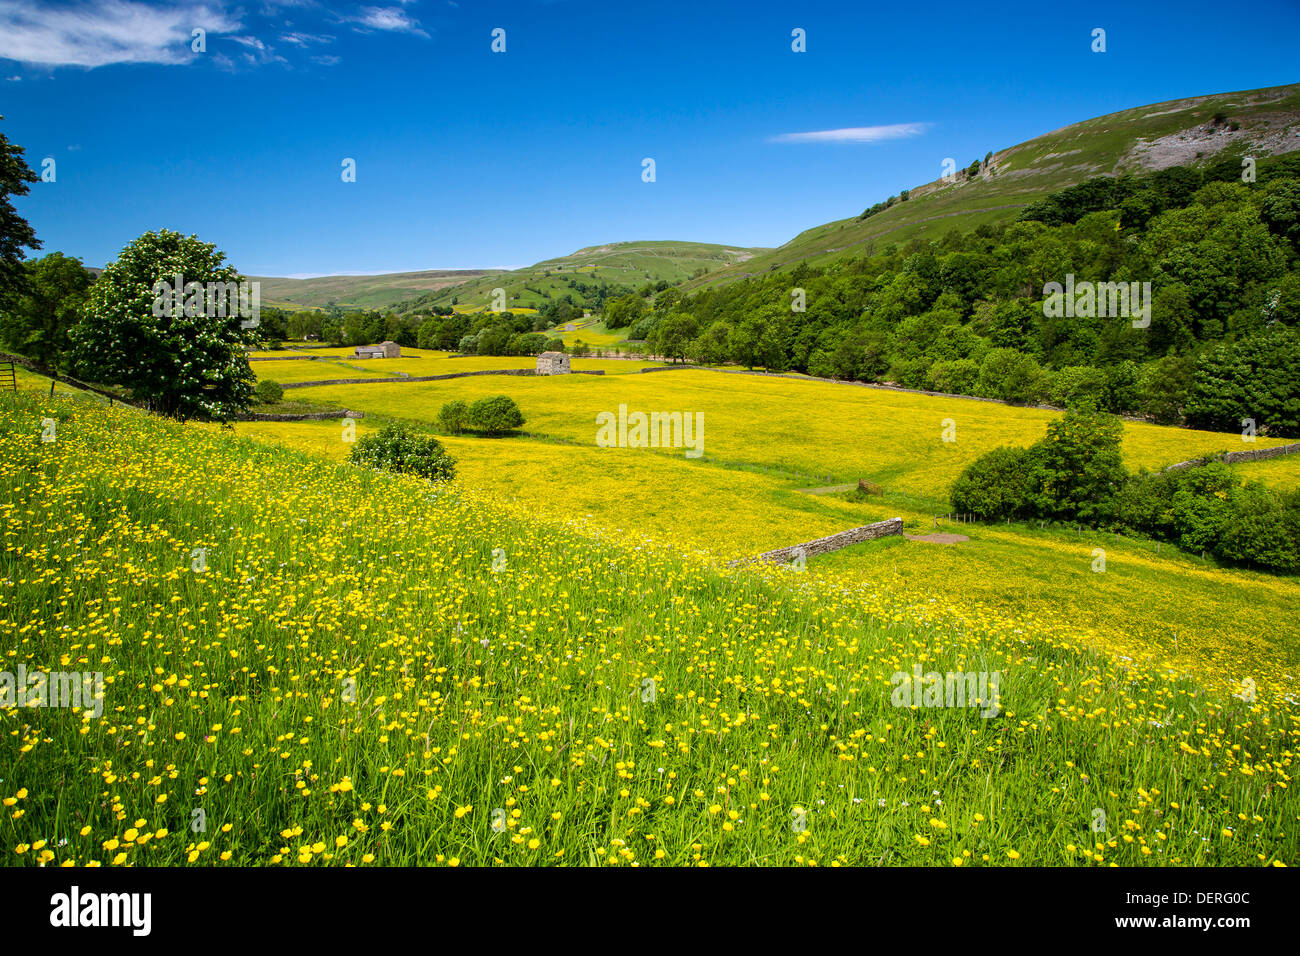 Wild flower meadow near Muker, Yorkshire Dales National Park Stock Photo